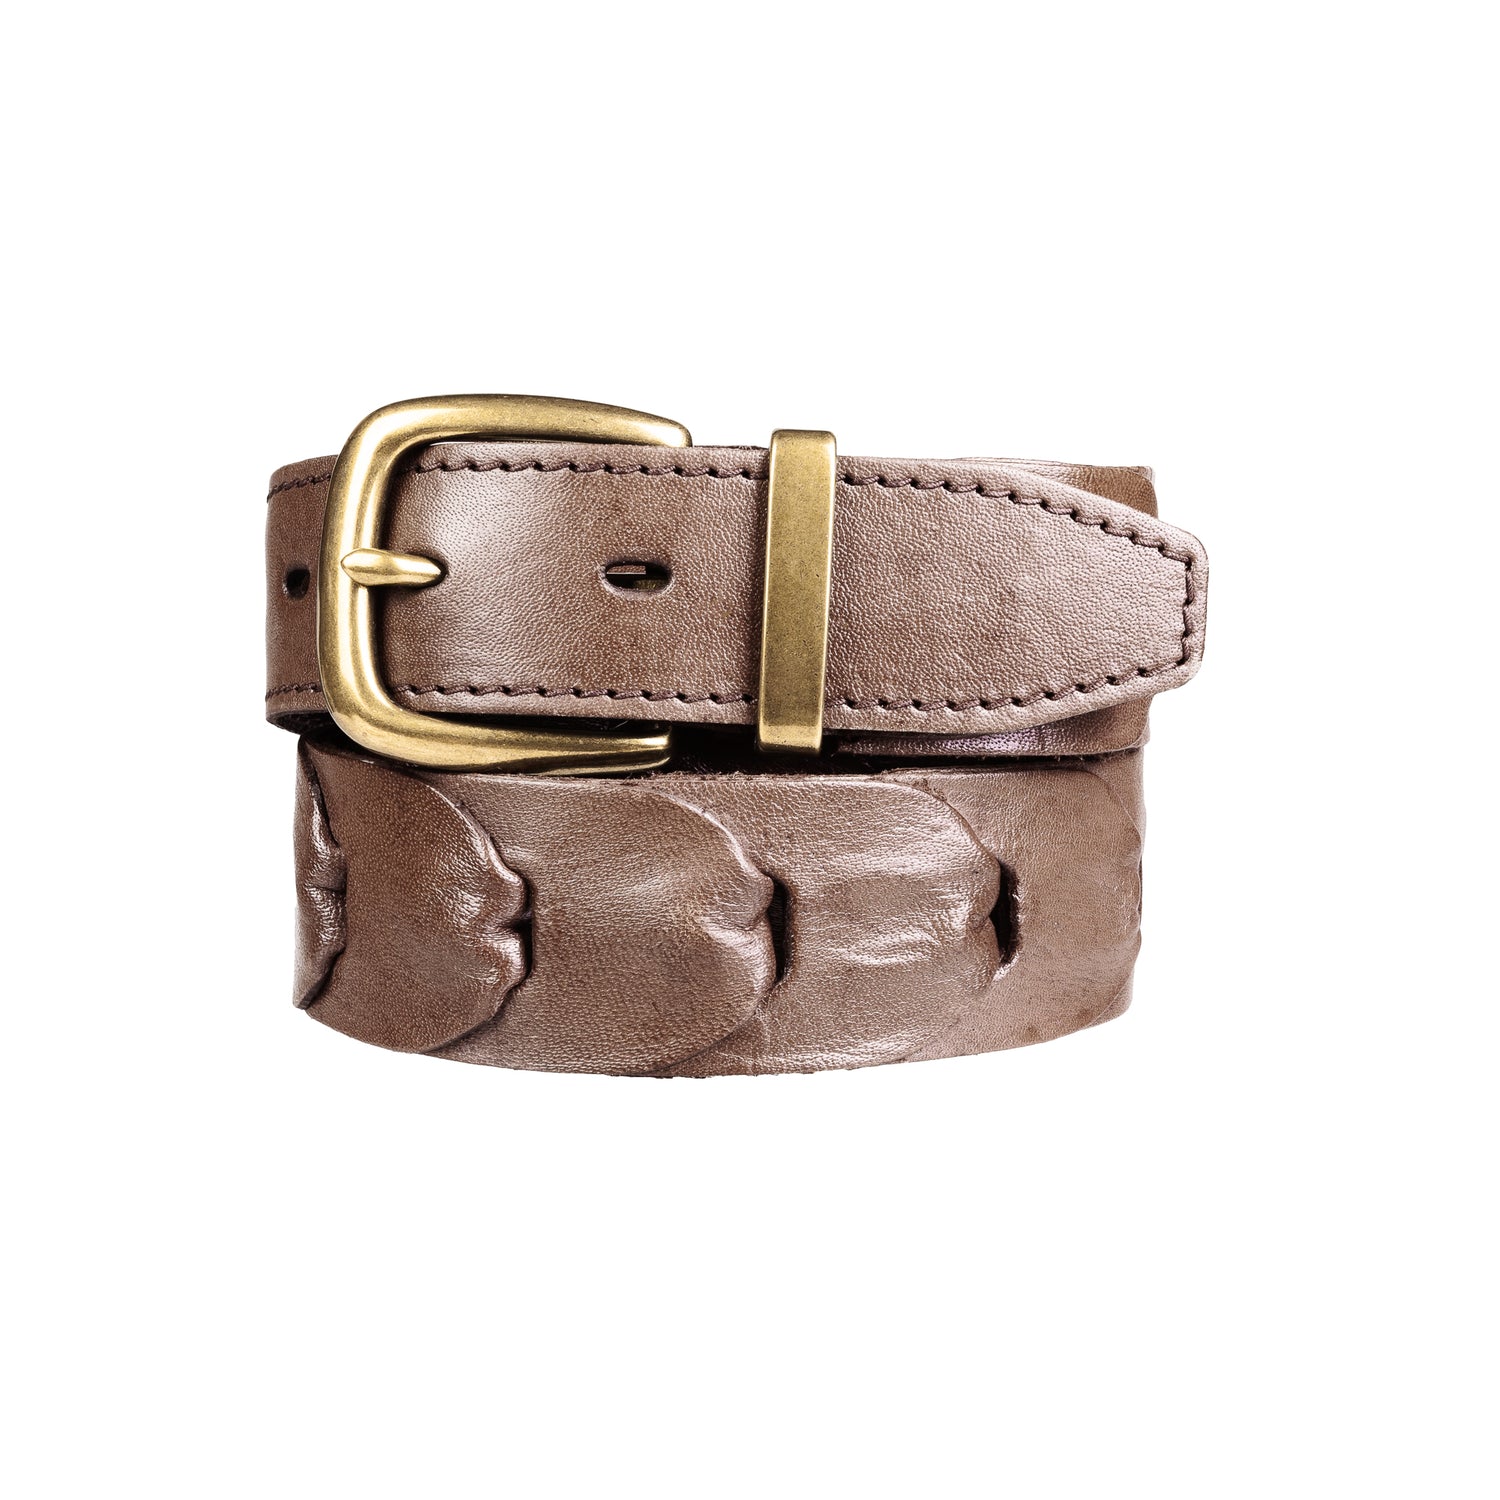 Premium Men's Leather Belt: Handcrafted in Australia from Full Grain Leather. solid brass buckle with Australian Kangaroo Leather on white background.